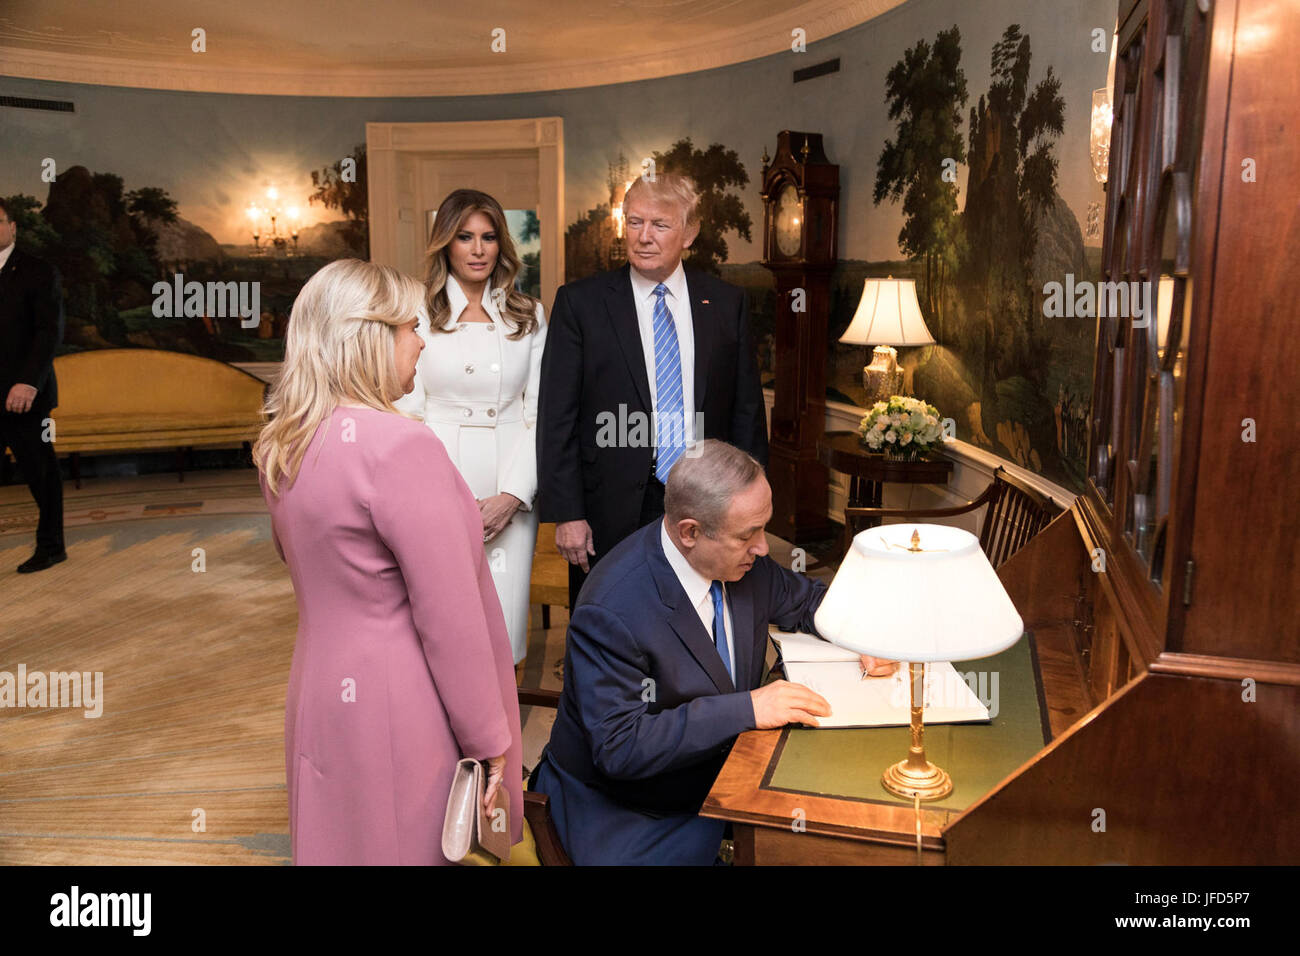 President Donald Trump and First Lady Melania Trump accompany Israeli Prime Minister Benjamin Netanyahu and his wife, Sara Netanyahu, Wednesday, Feb. 15, 2017, to the Diplomatic Reception room to sign the guest book at the White House in Washington, D.C. (Official White House Photo by Shealah Craighead) Stock Photo